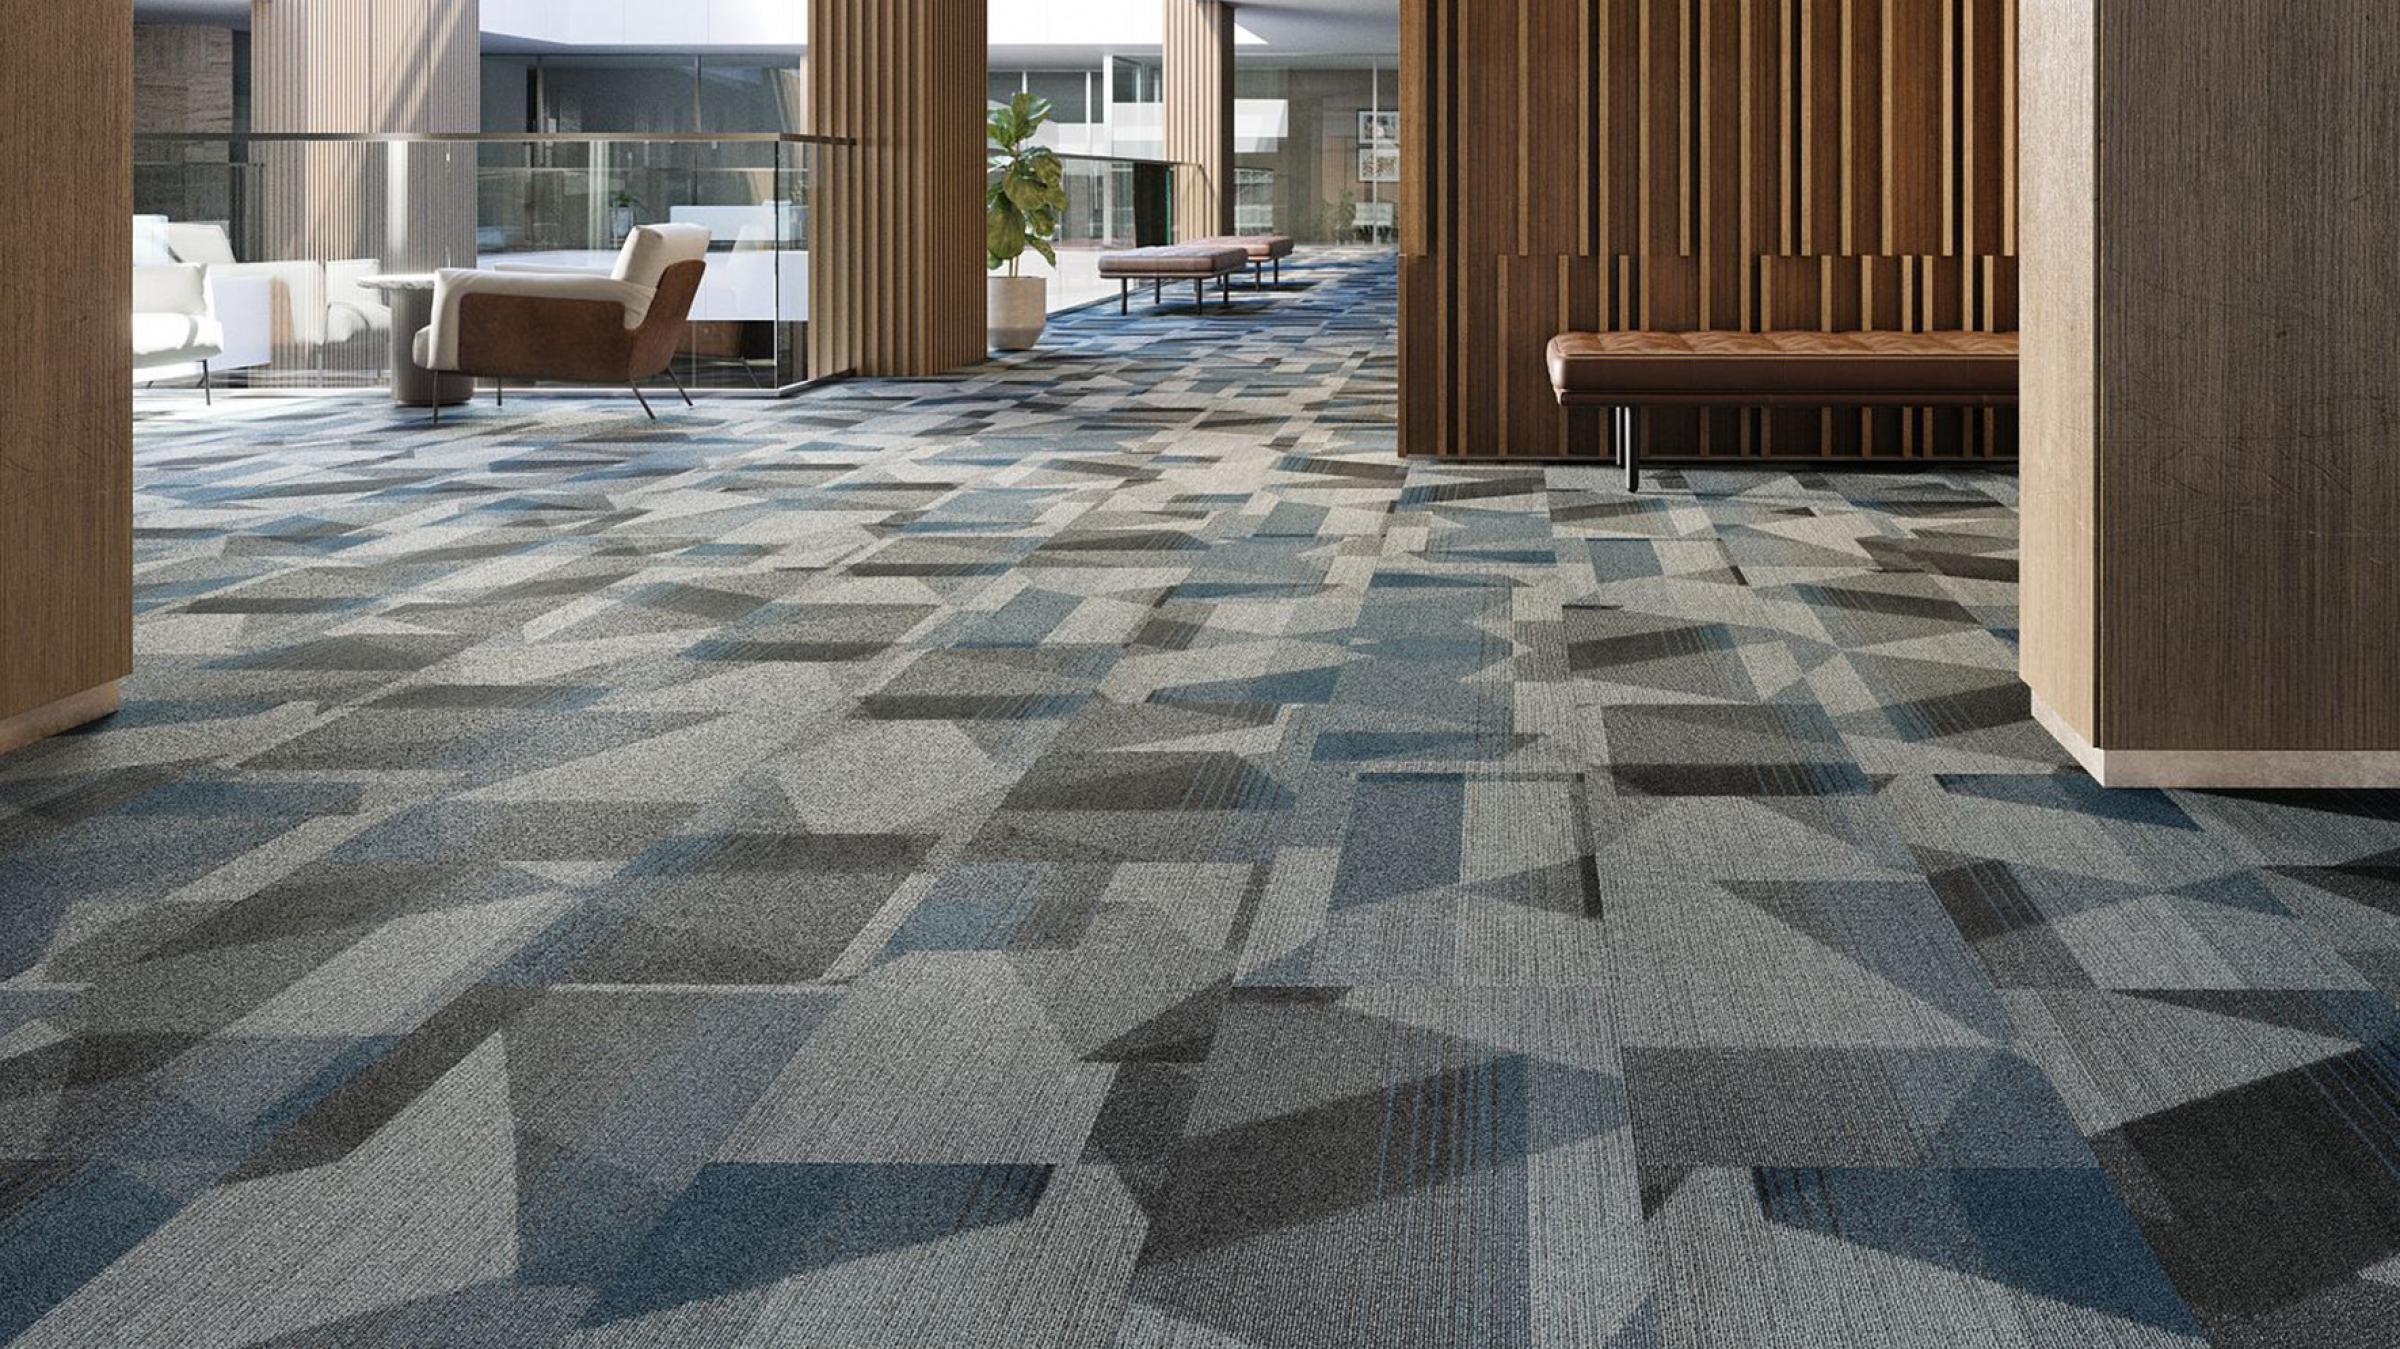 Expertise in flooring solutions for high-traffic spaces